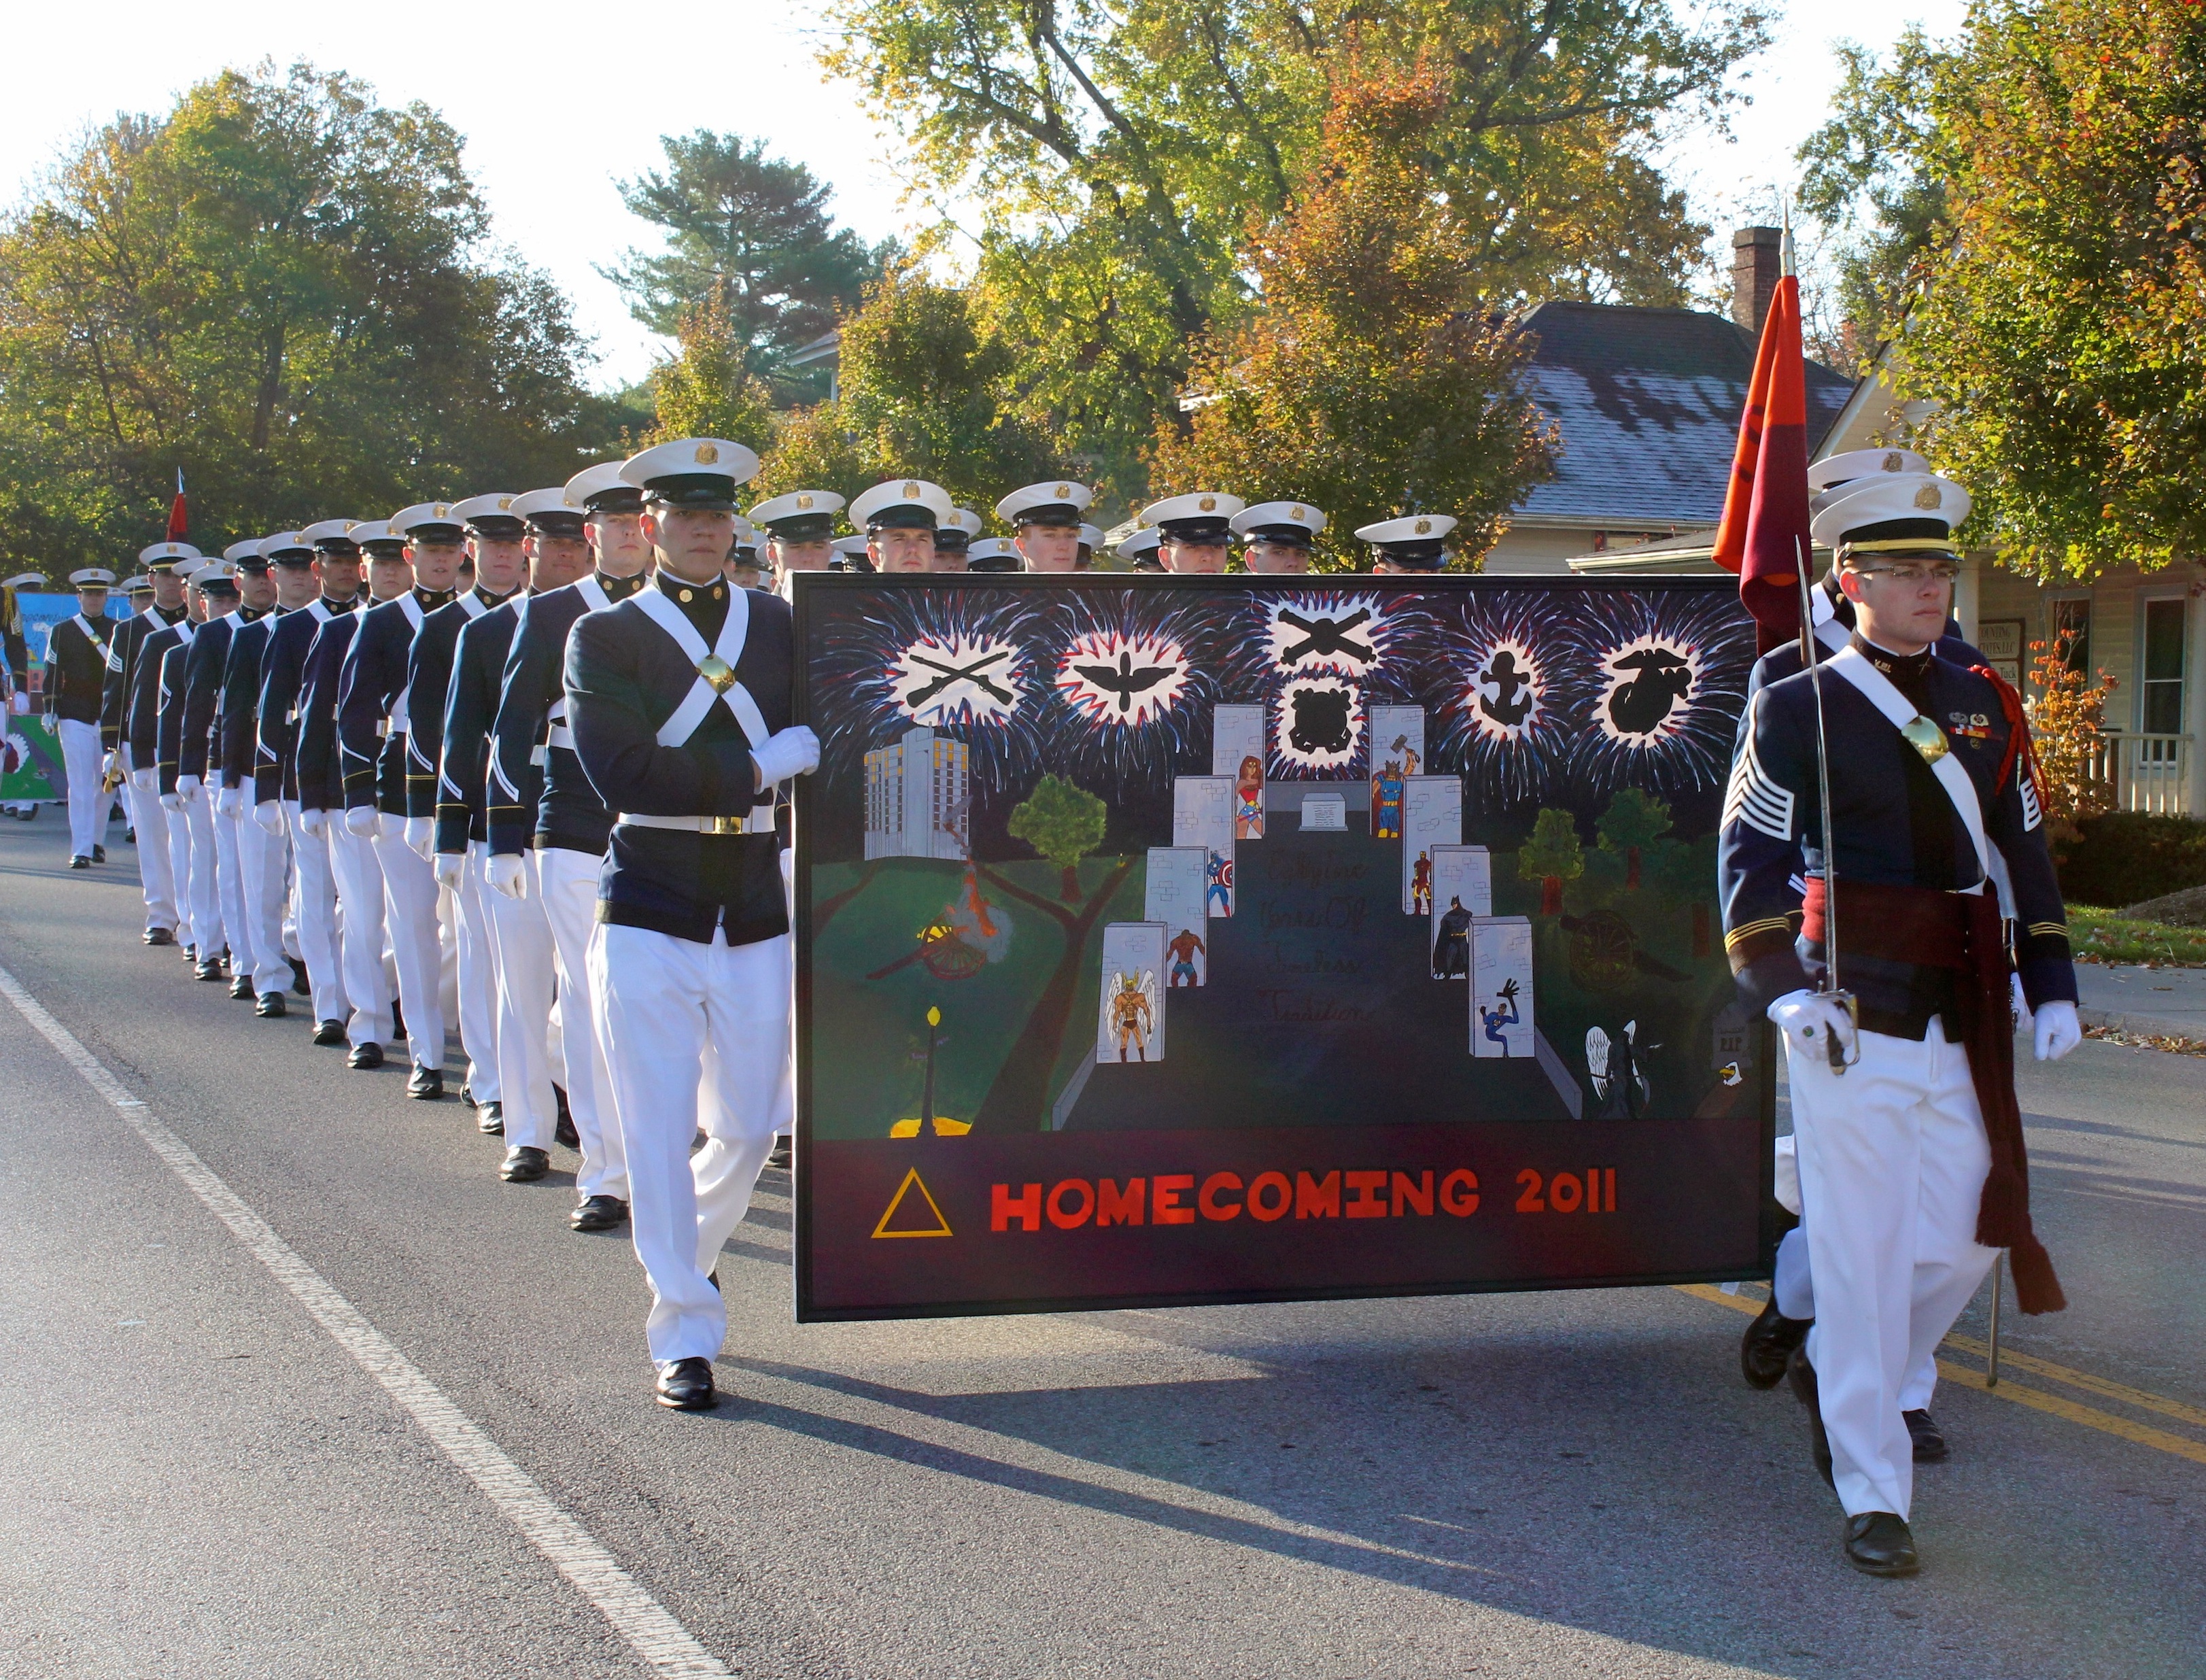 Membersof Delta Company of the Virginia Tech Corps of Cadets march in the 2011 Homecoming parade through downtown Blacksburg.